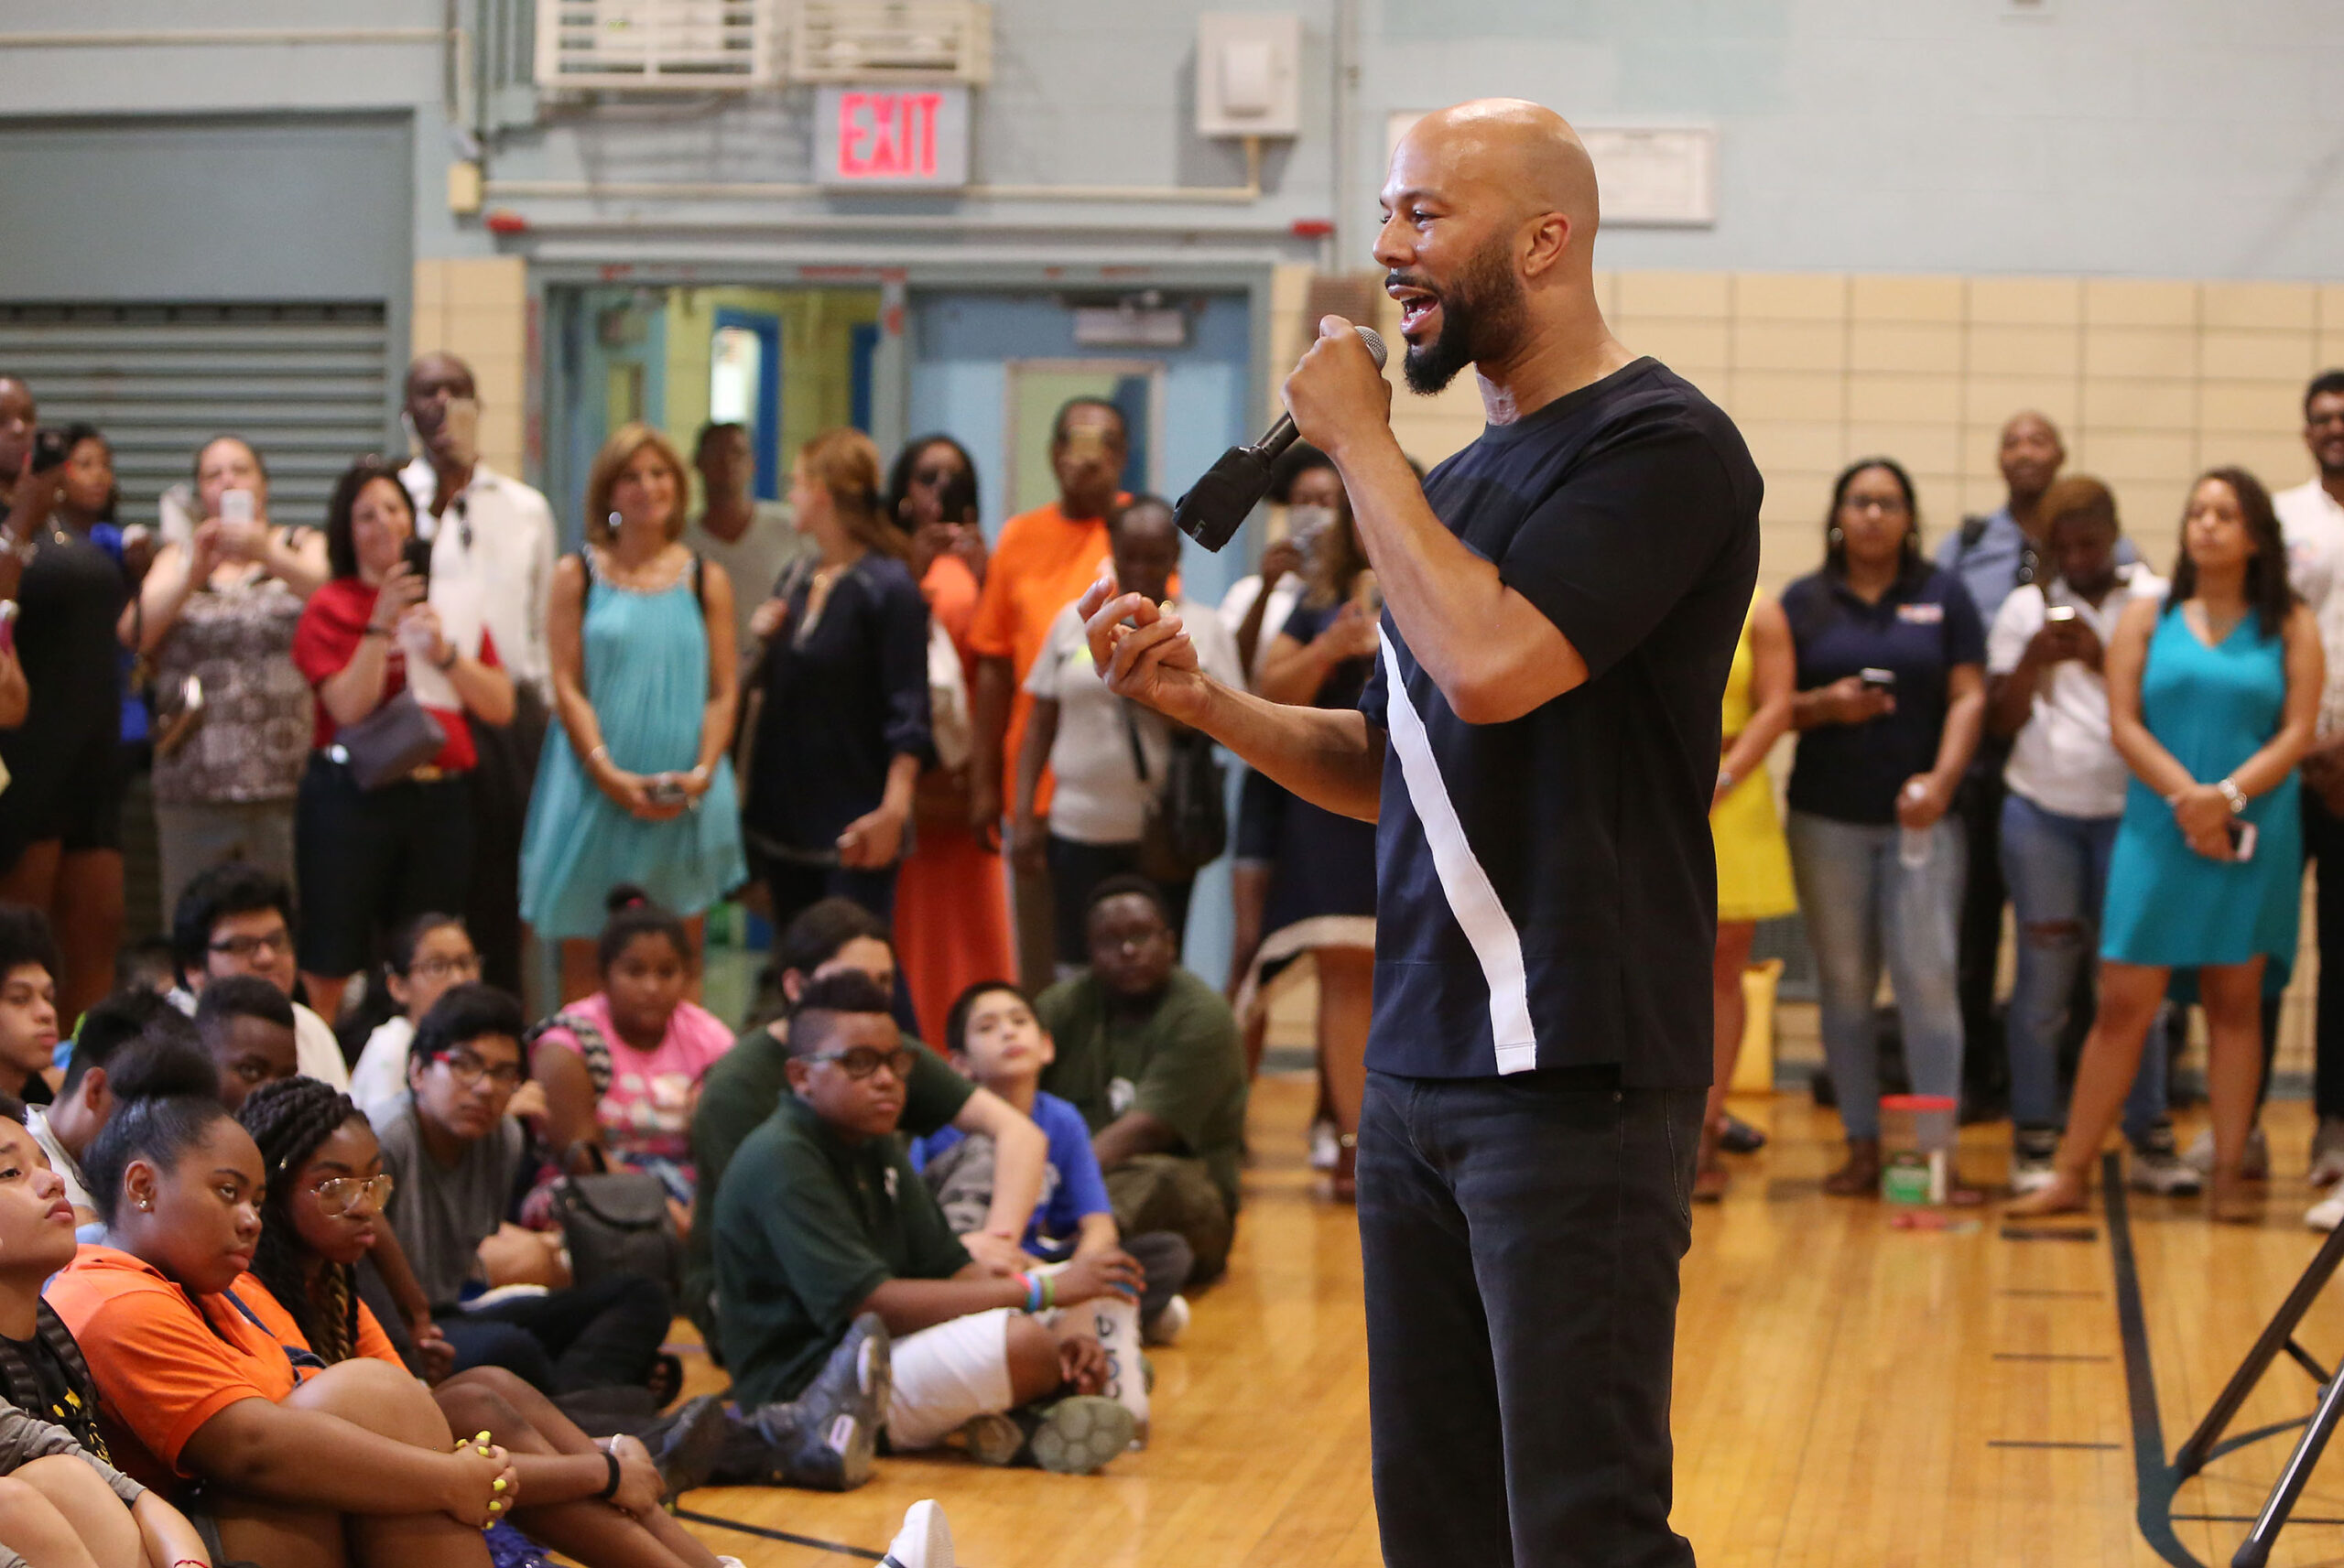 Common speaking to teachers and students in a gymnasium.